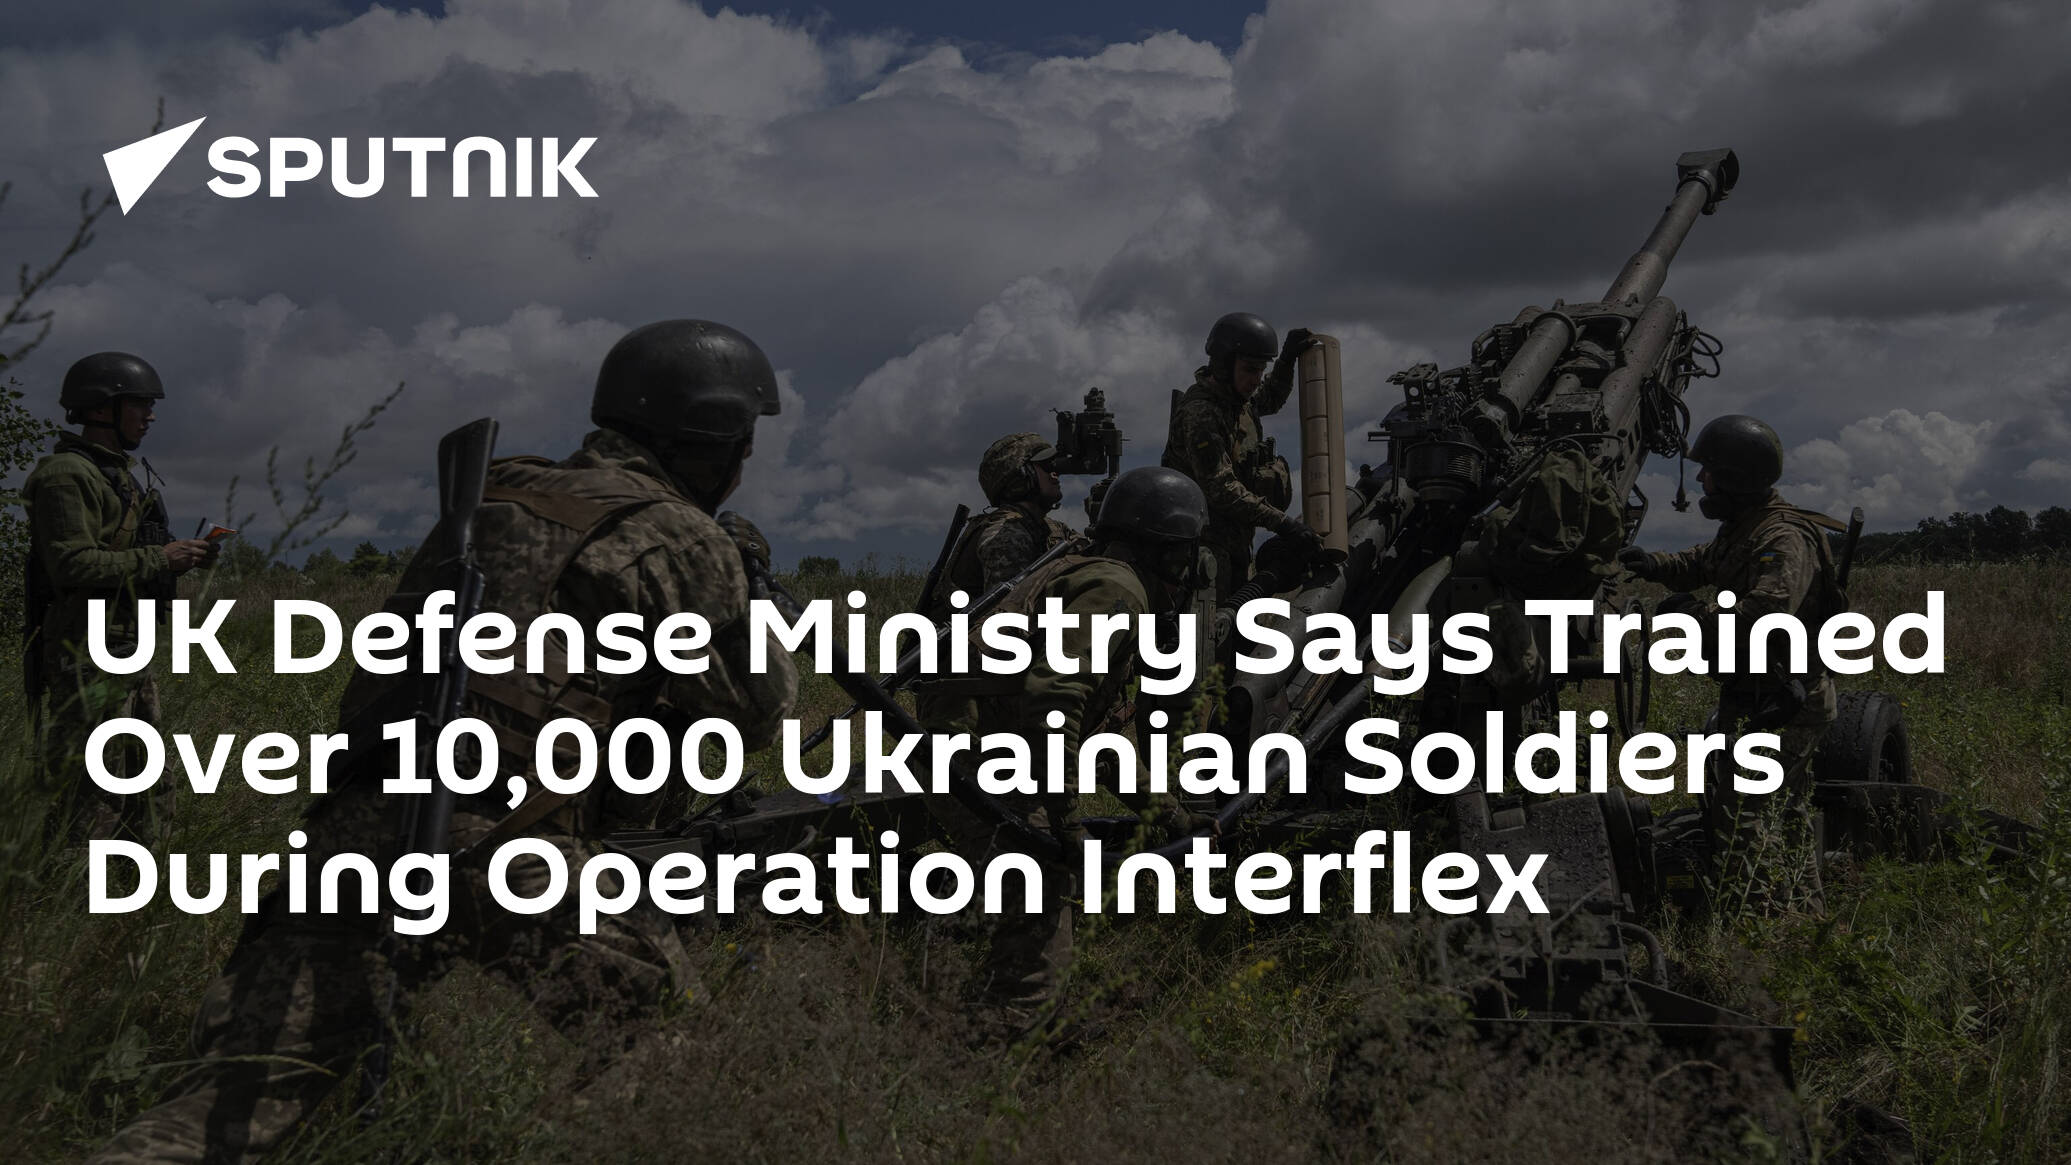 UK Defense Ministry Says Trained Over 10,000 Ukrainian Soldiers During Operation Interflex